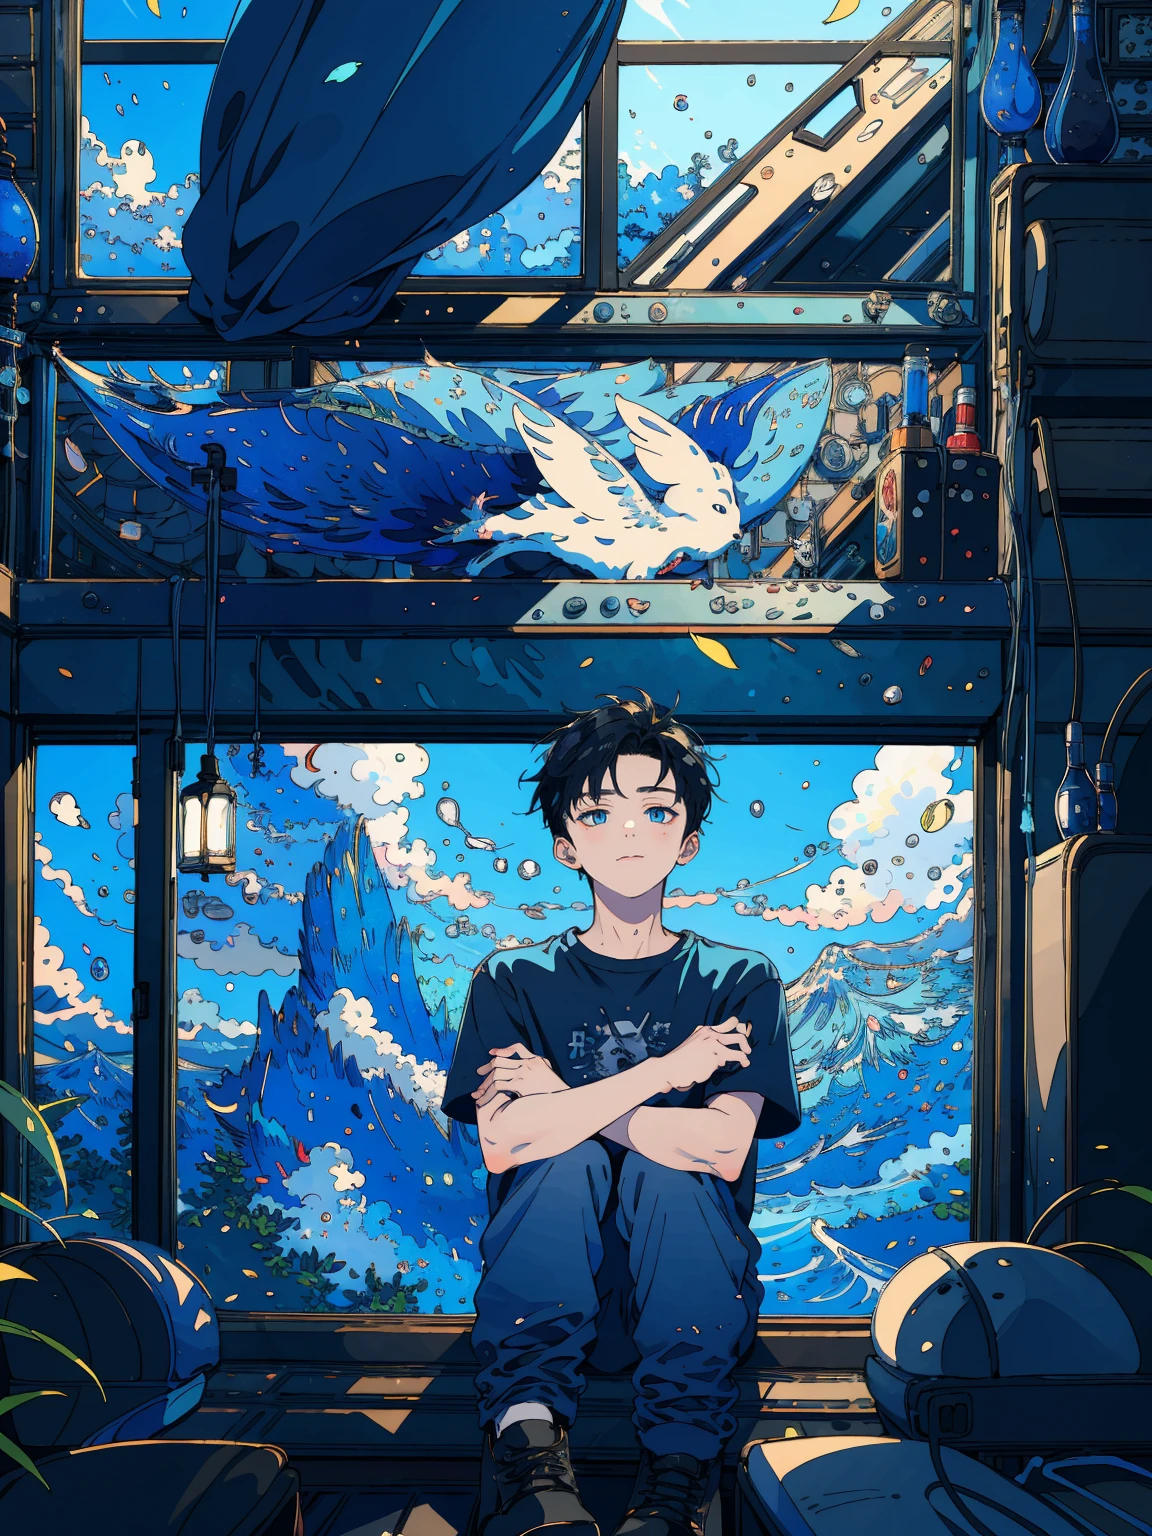 (masterpiece:1.2), best quality,PIXIV,fairy tale style, 18 years old, boy, black hair, blue eyes, indifferent, looking at the nearing dusk from the window, sitting inside of an classroom,


